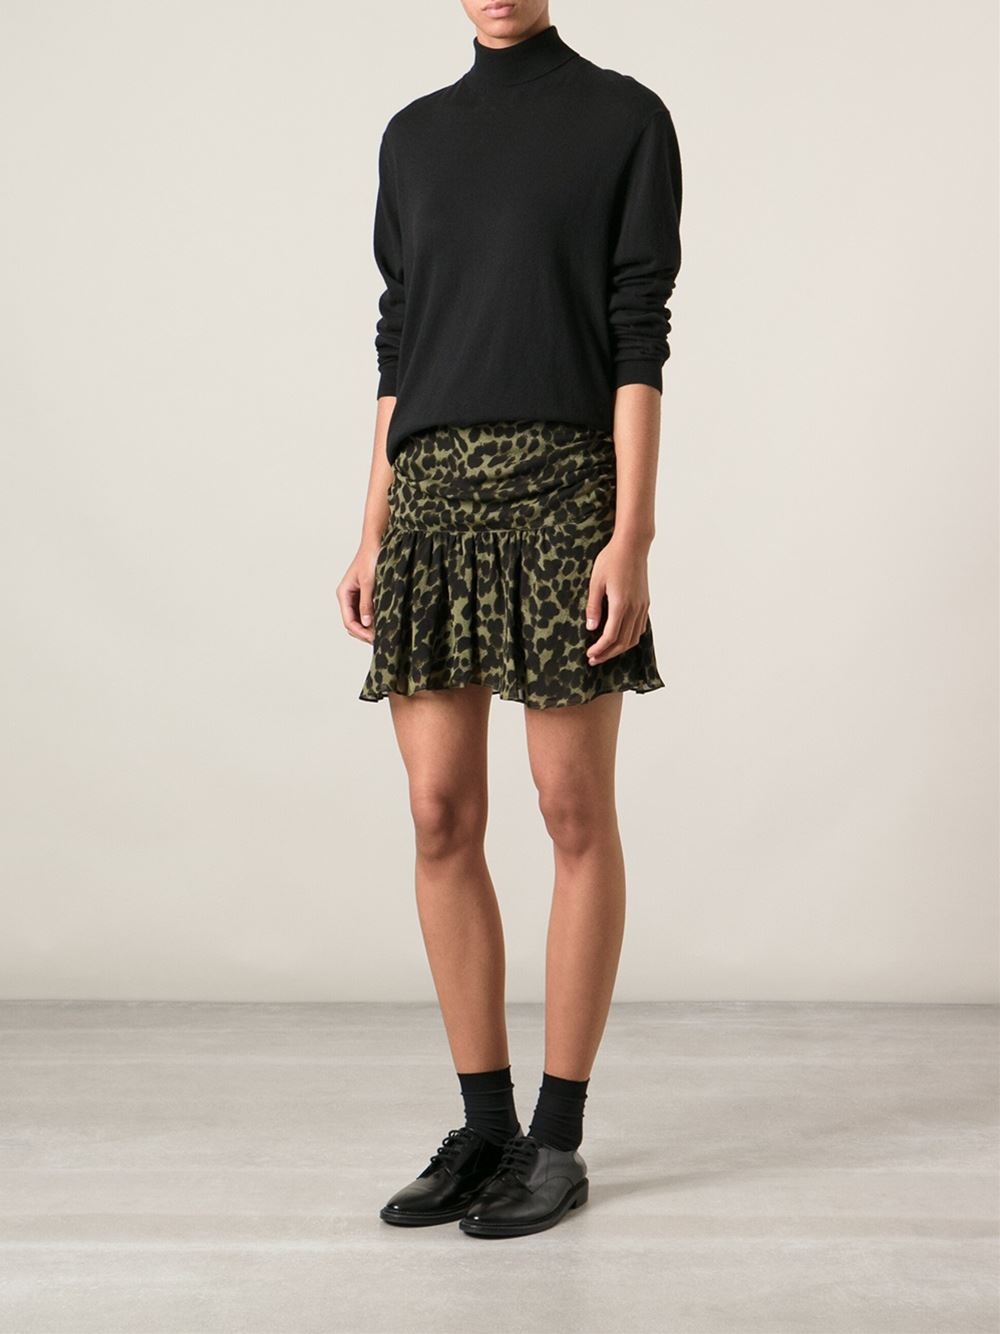 Étoile Isabel Marant Leopard Print Rushed Skirt in Green | Lyst